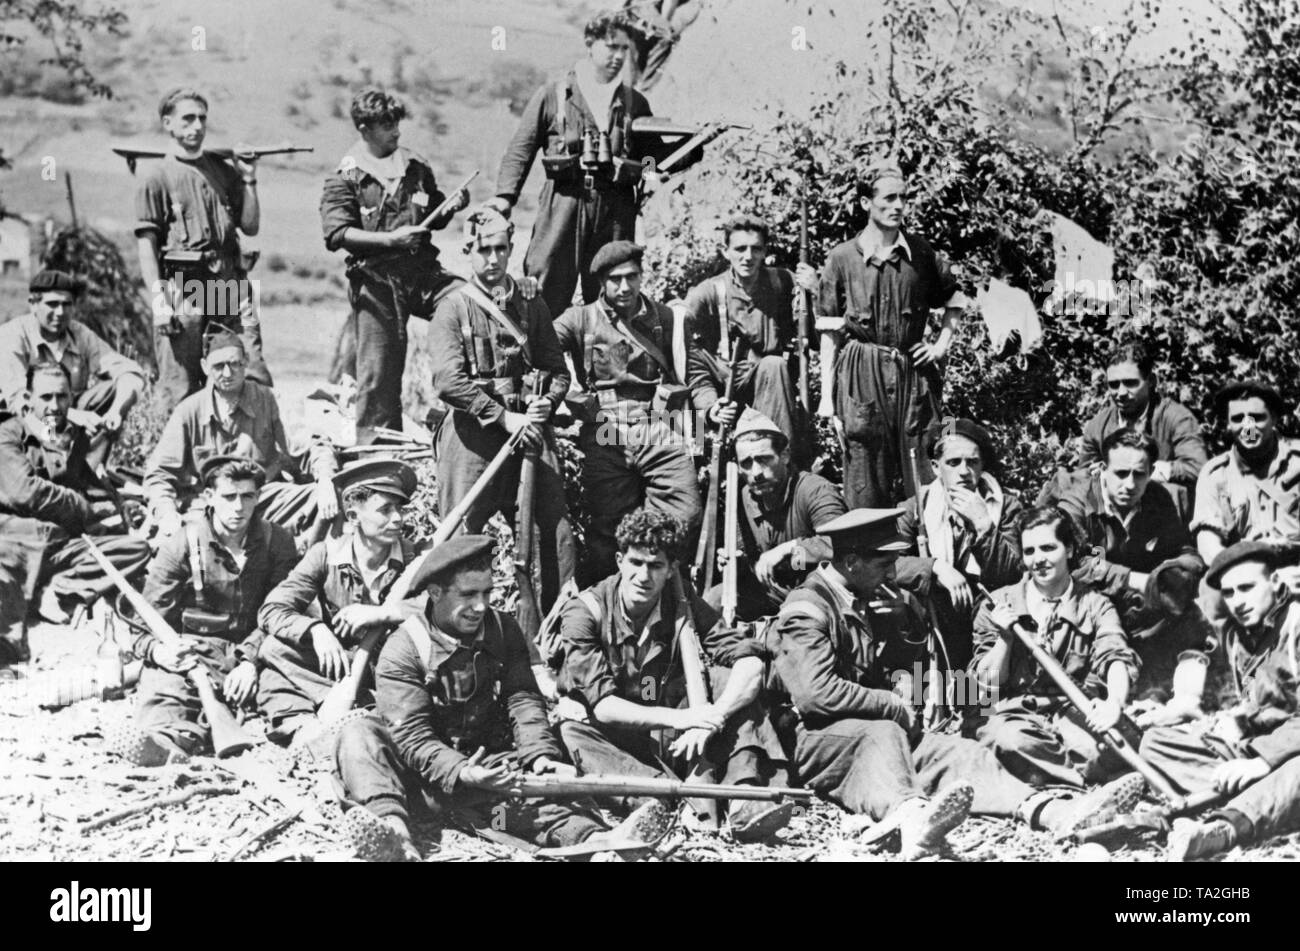 Group photo of Republican fighters of the People's Front during the battle of San Sebastian (Donostia) on the Northern Front in the Basque Country. The soldiers wear uniforms or blue overalls and are armed with rifles. They are wearing nailed boots. On the right, a woman. In the background, hills. Stock Photo